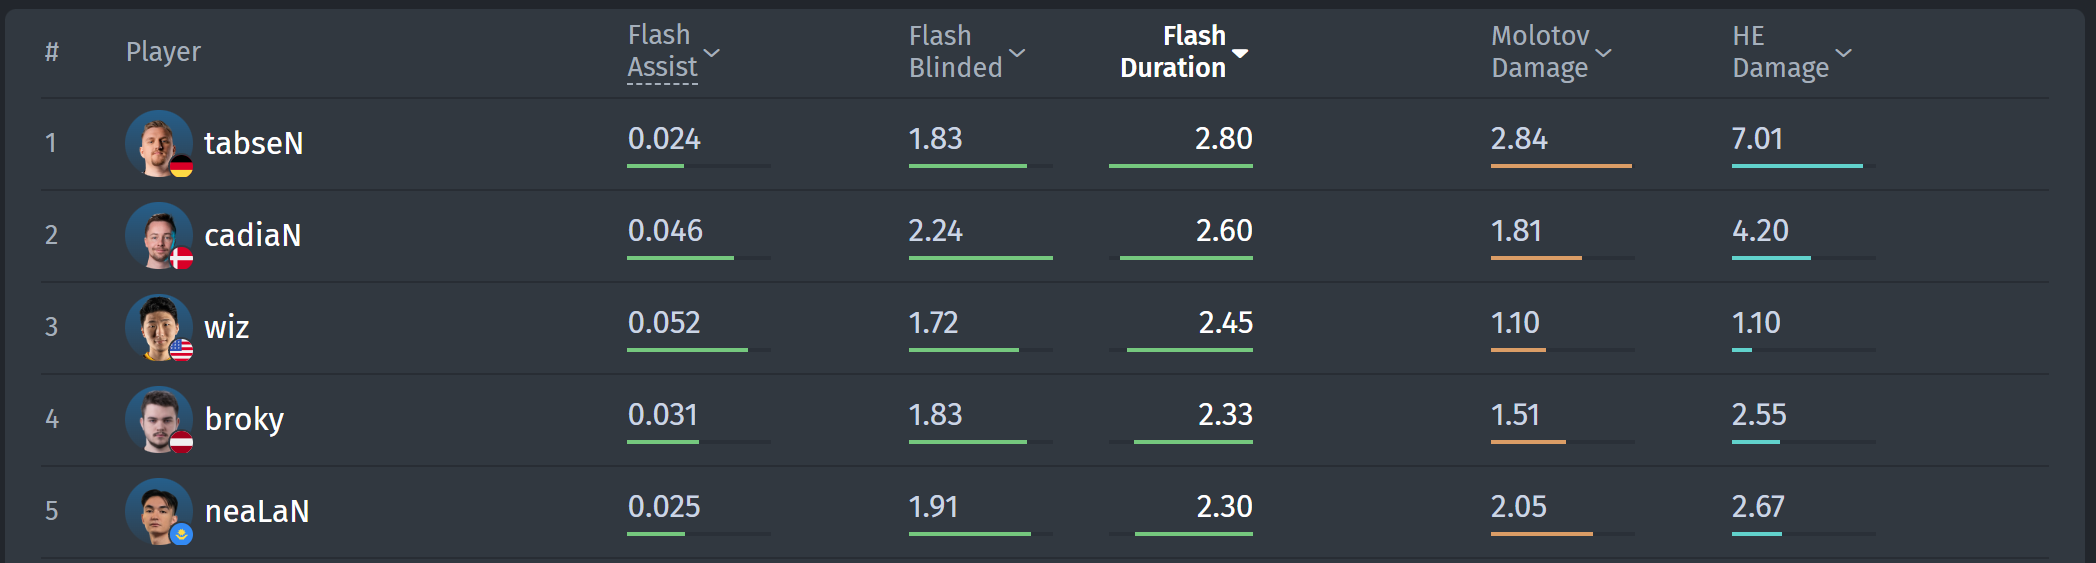 Top 5 players by flash duration on BLAST